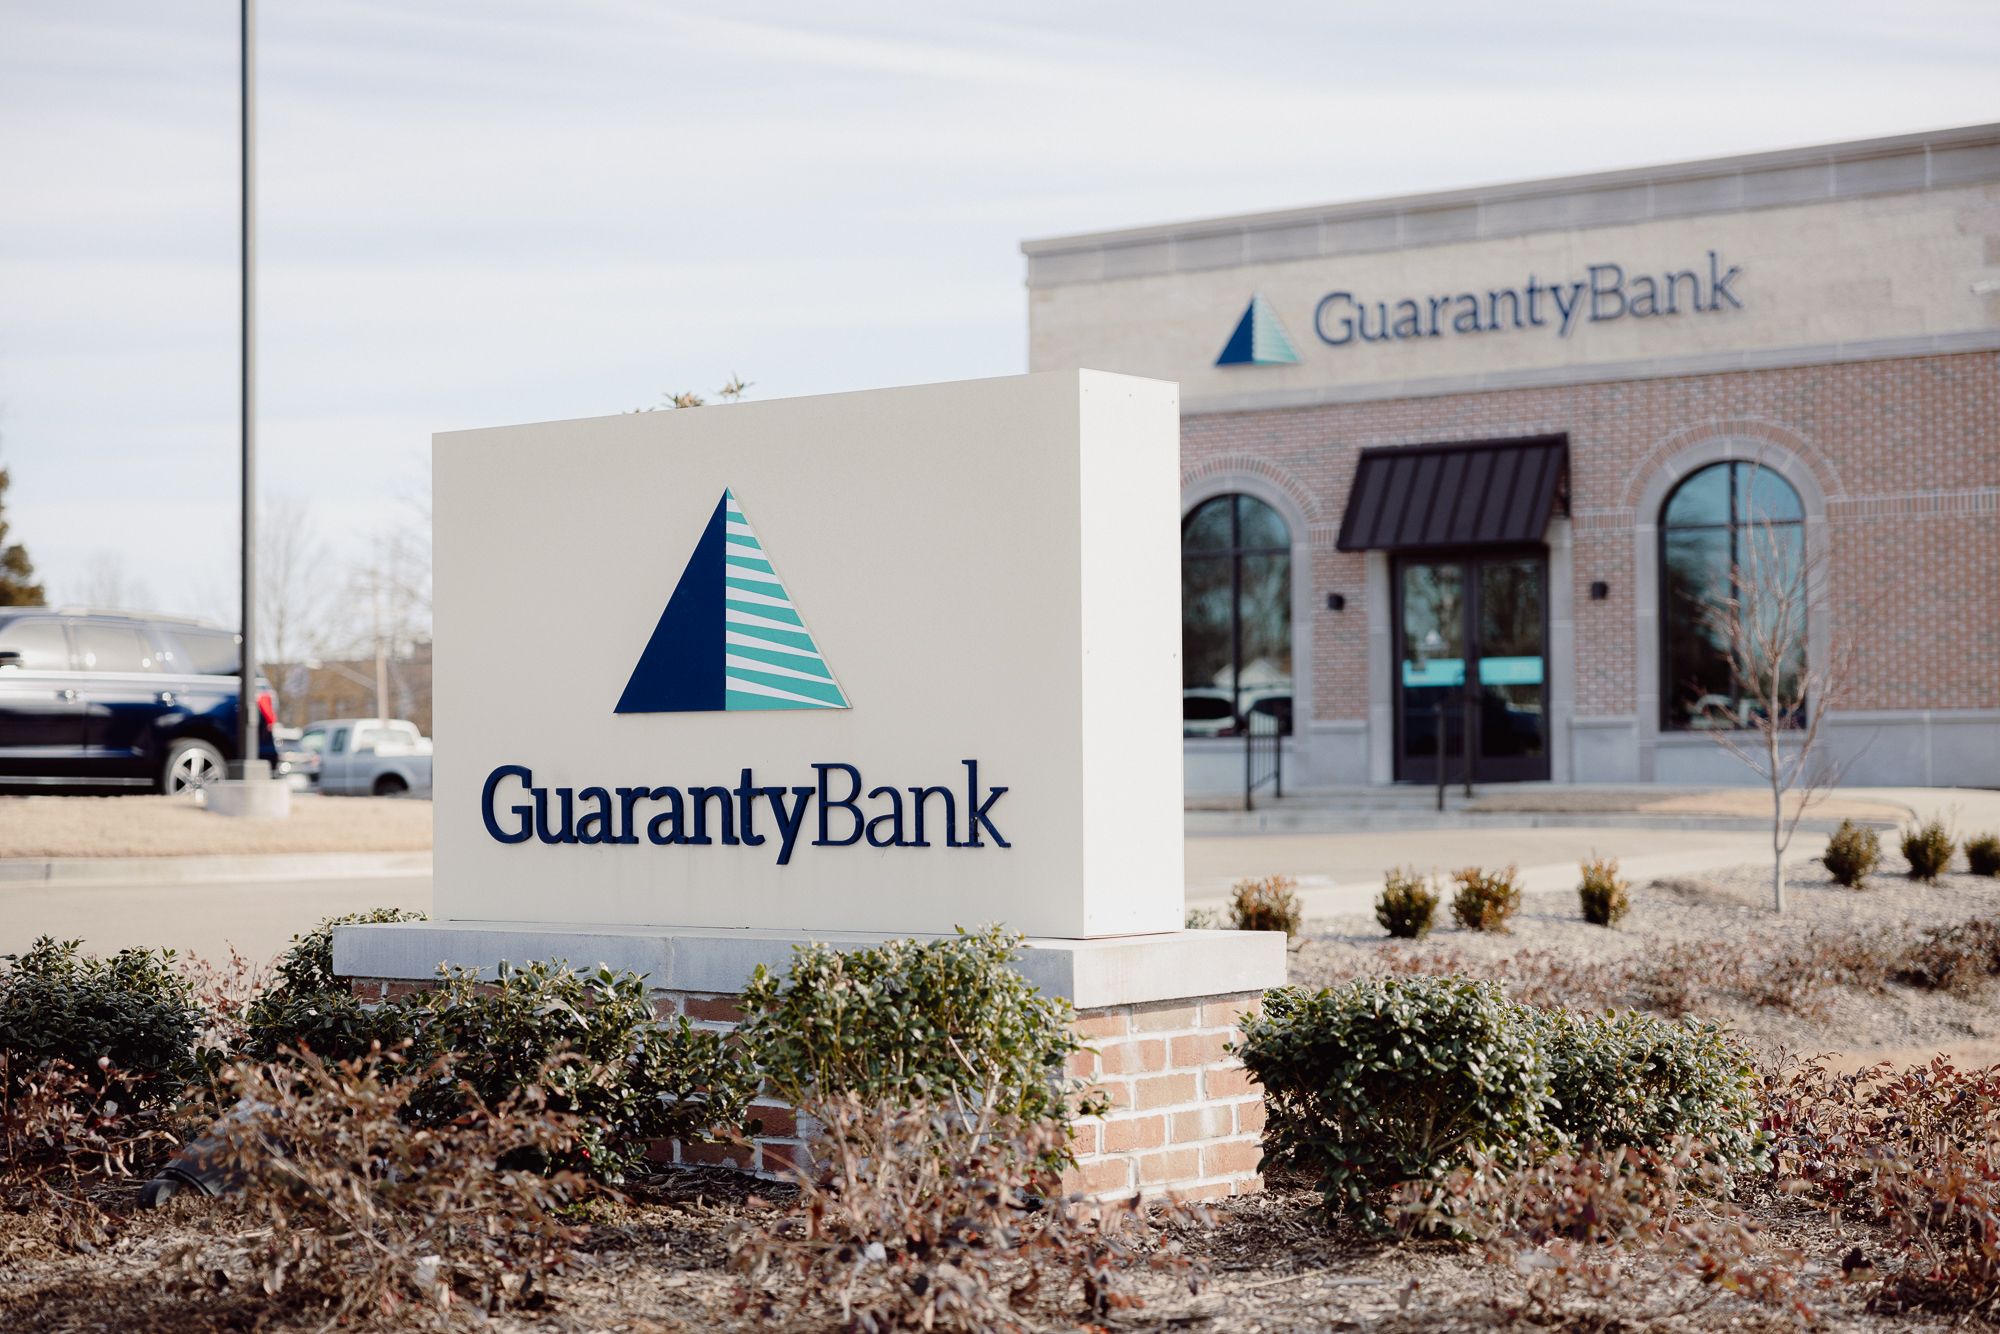 Guaranty Bank outdoor signage in front of the bank building.